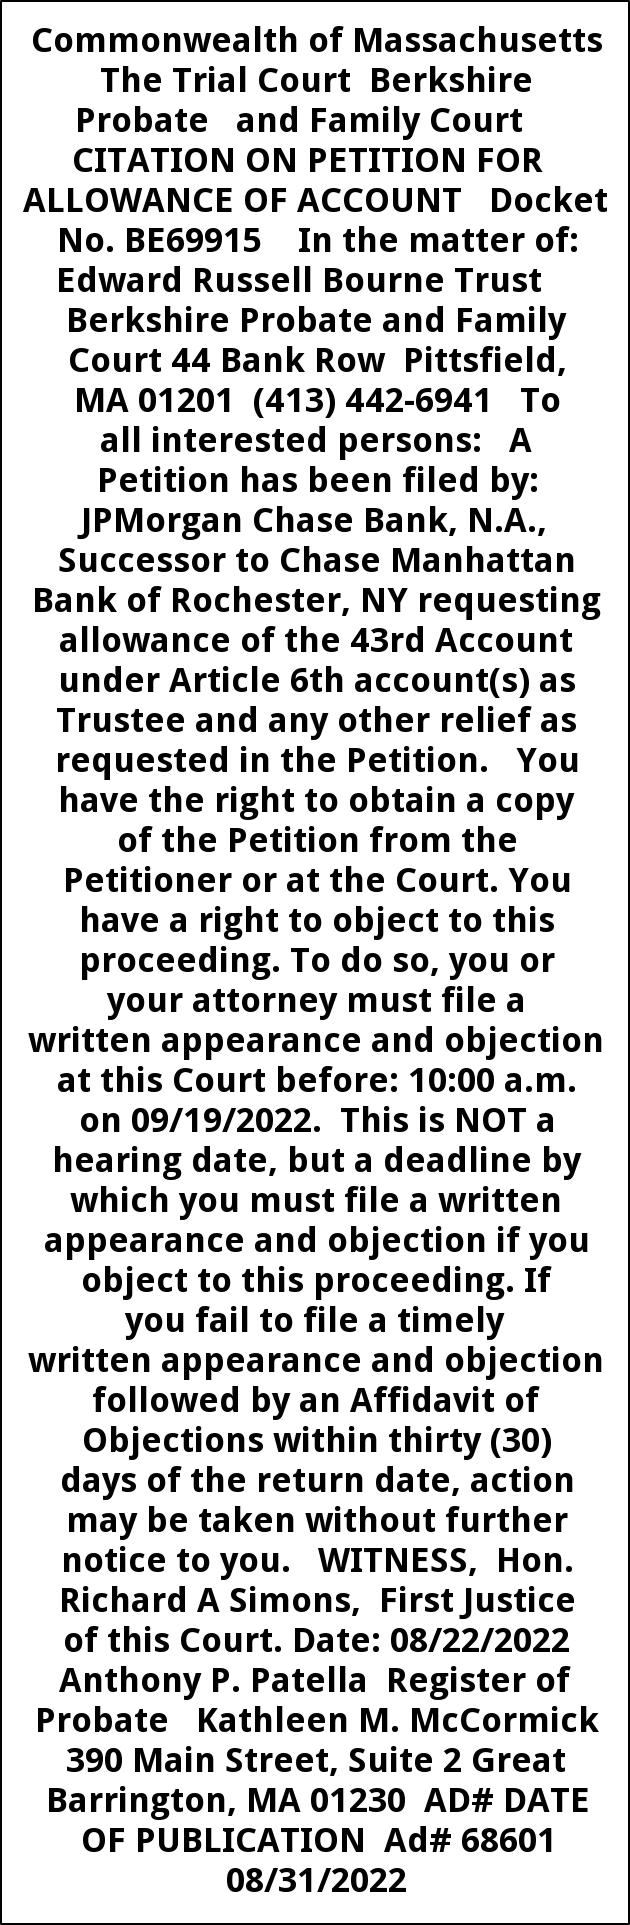 Citation on Petition For Allowance of Account